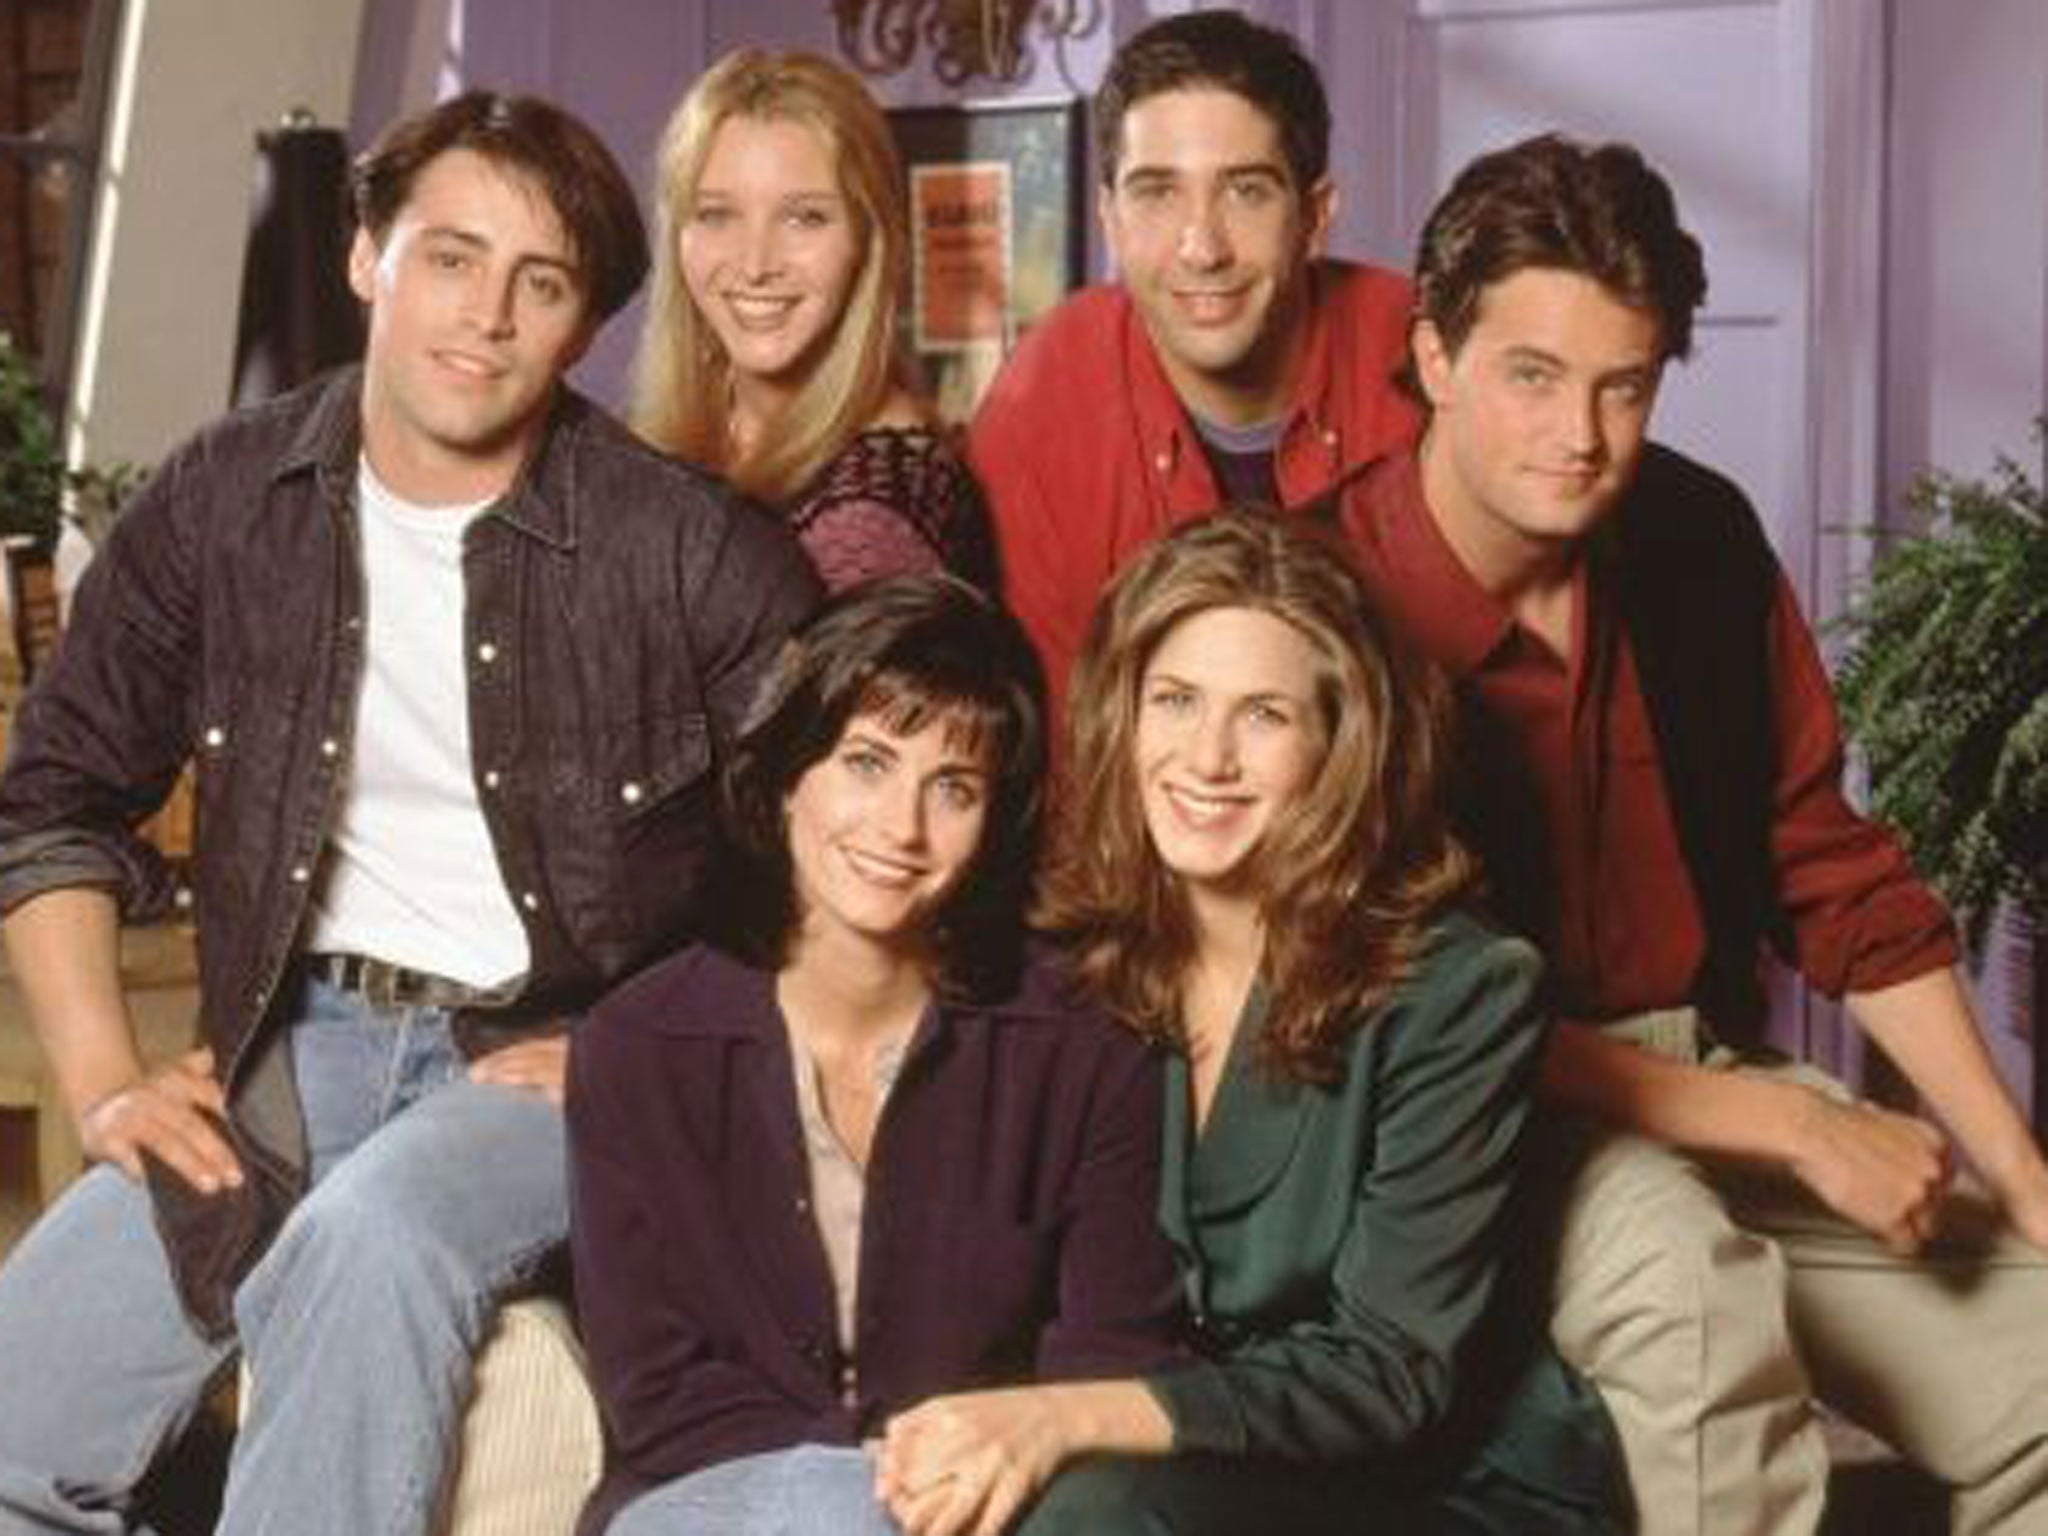 Jennifer Aniston with the cast of ‘Friends’ (from left, Matt LeBlanc, Lisa Kudrow, Courteney Cox, David Schwimmer and Matthew Perry)